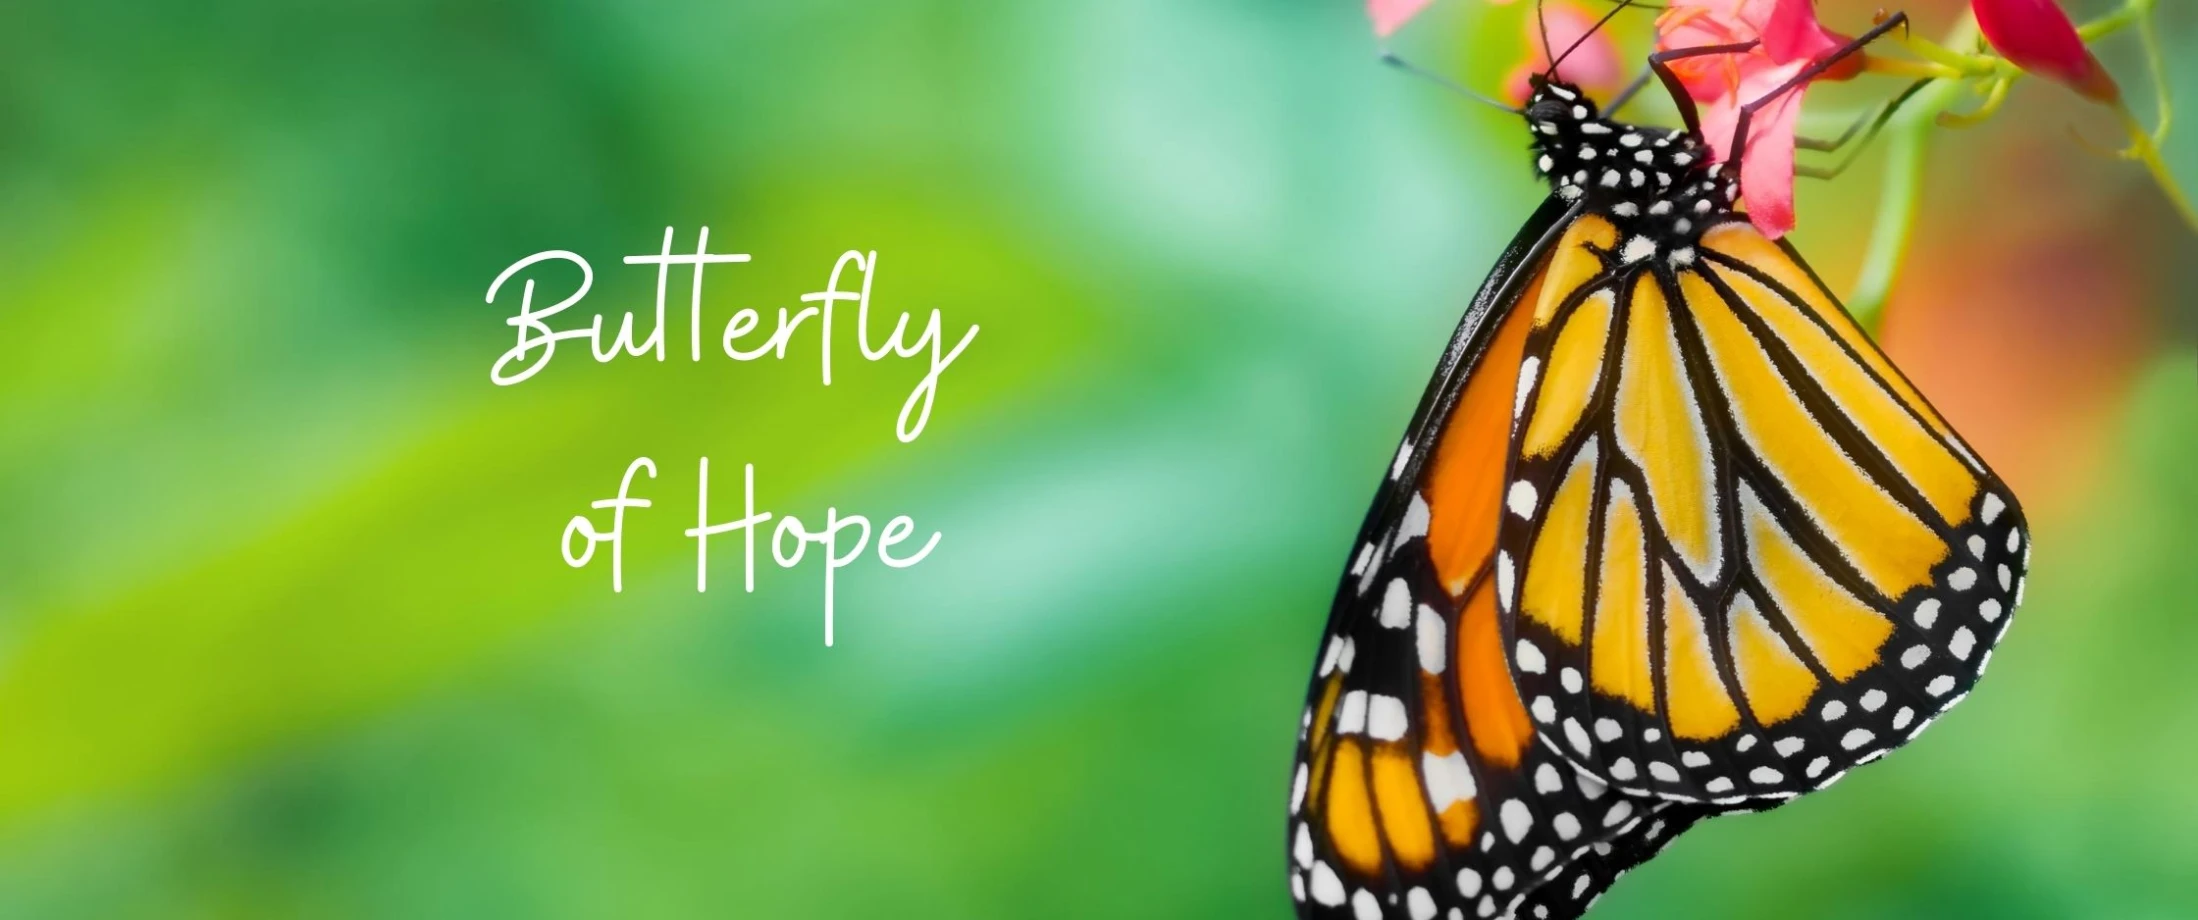 Butterflies of Hope Competition